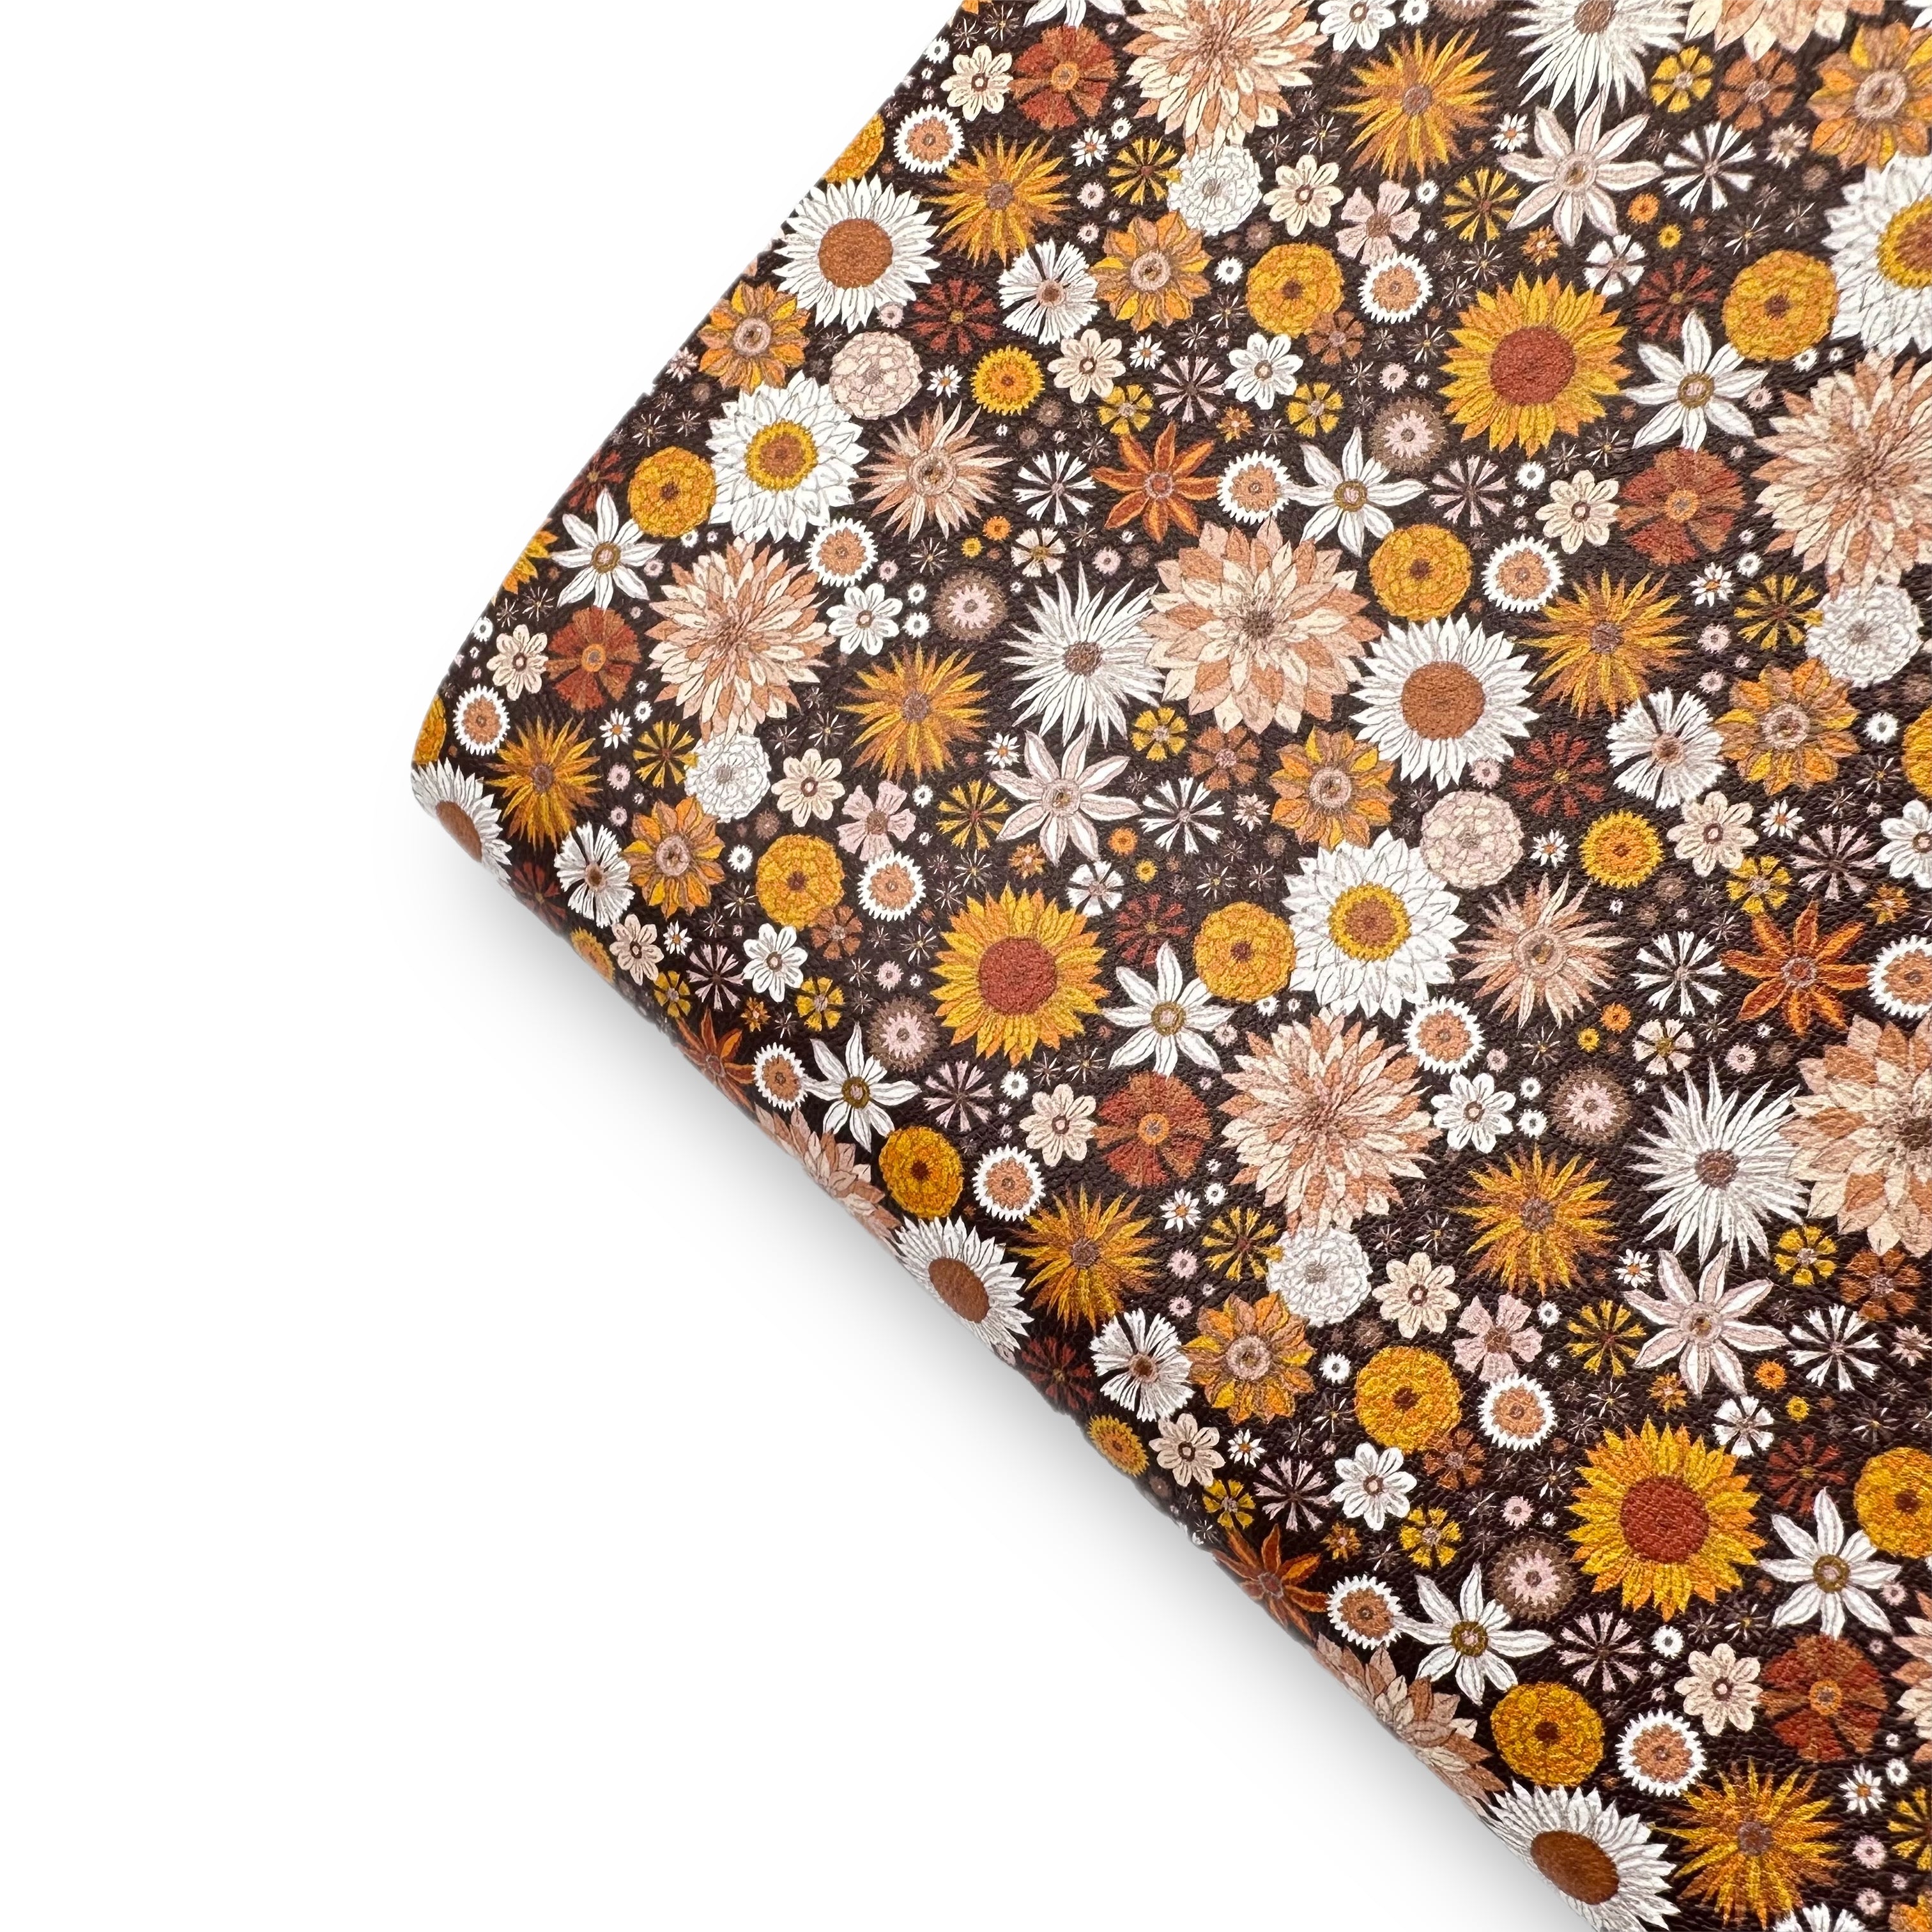 Autumn Brown Blooms Premium Faux Leather Fabric Sheets